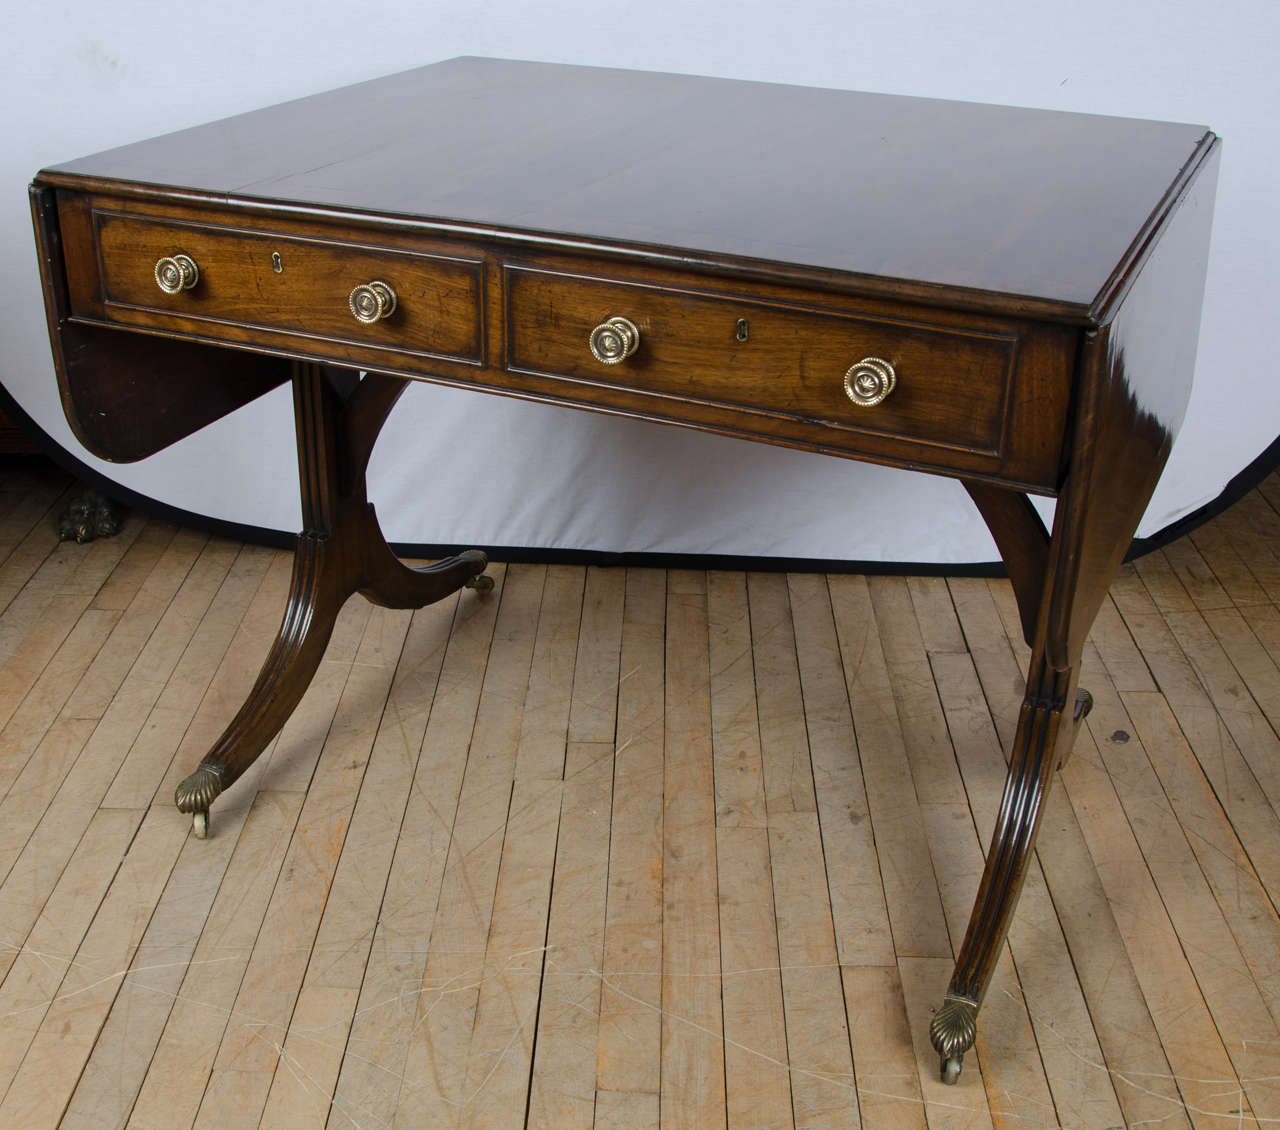 A fine quality 19th C. beautifully paginated mahogany top with a wide rosewood cross banded border that is supported on reeded, Sabre leg end supports with brass castors. The sofa table has 2 top drawers on one side with 2 matching false drawers